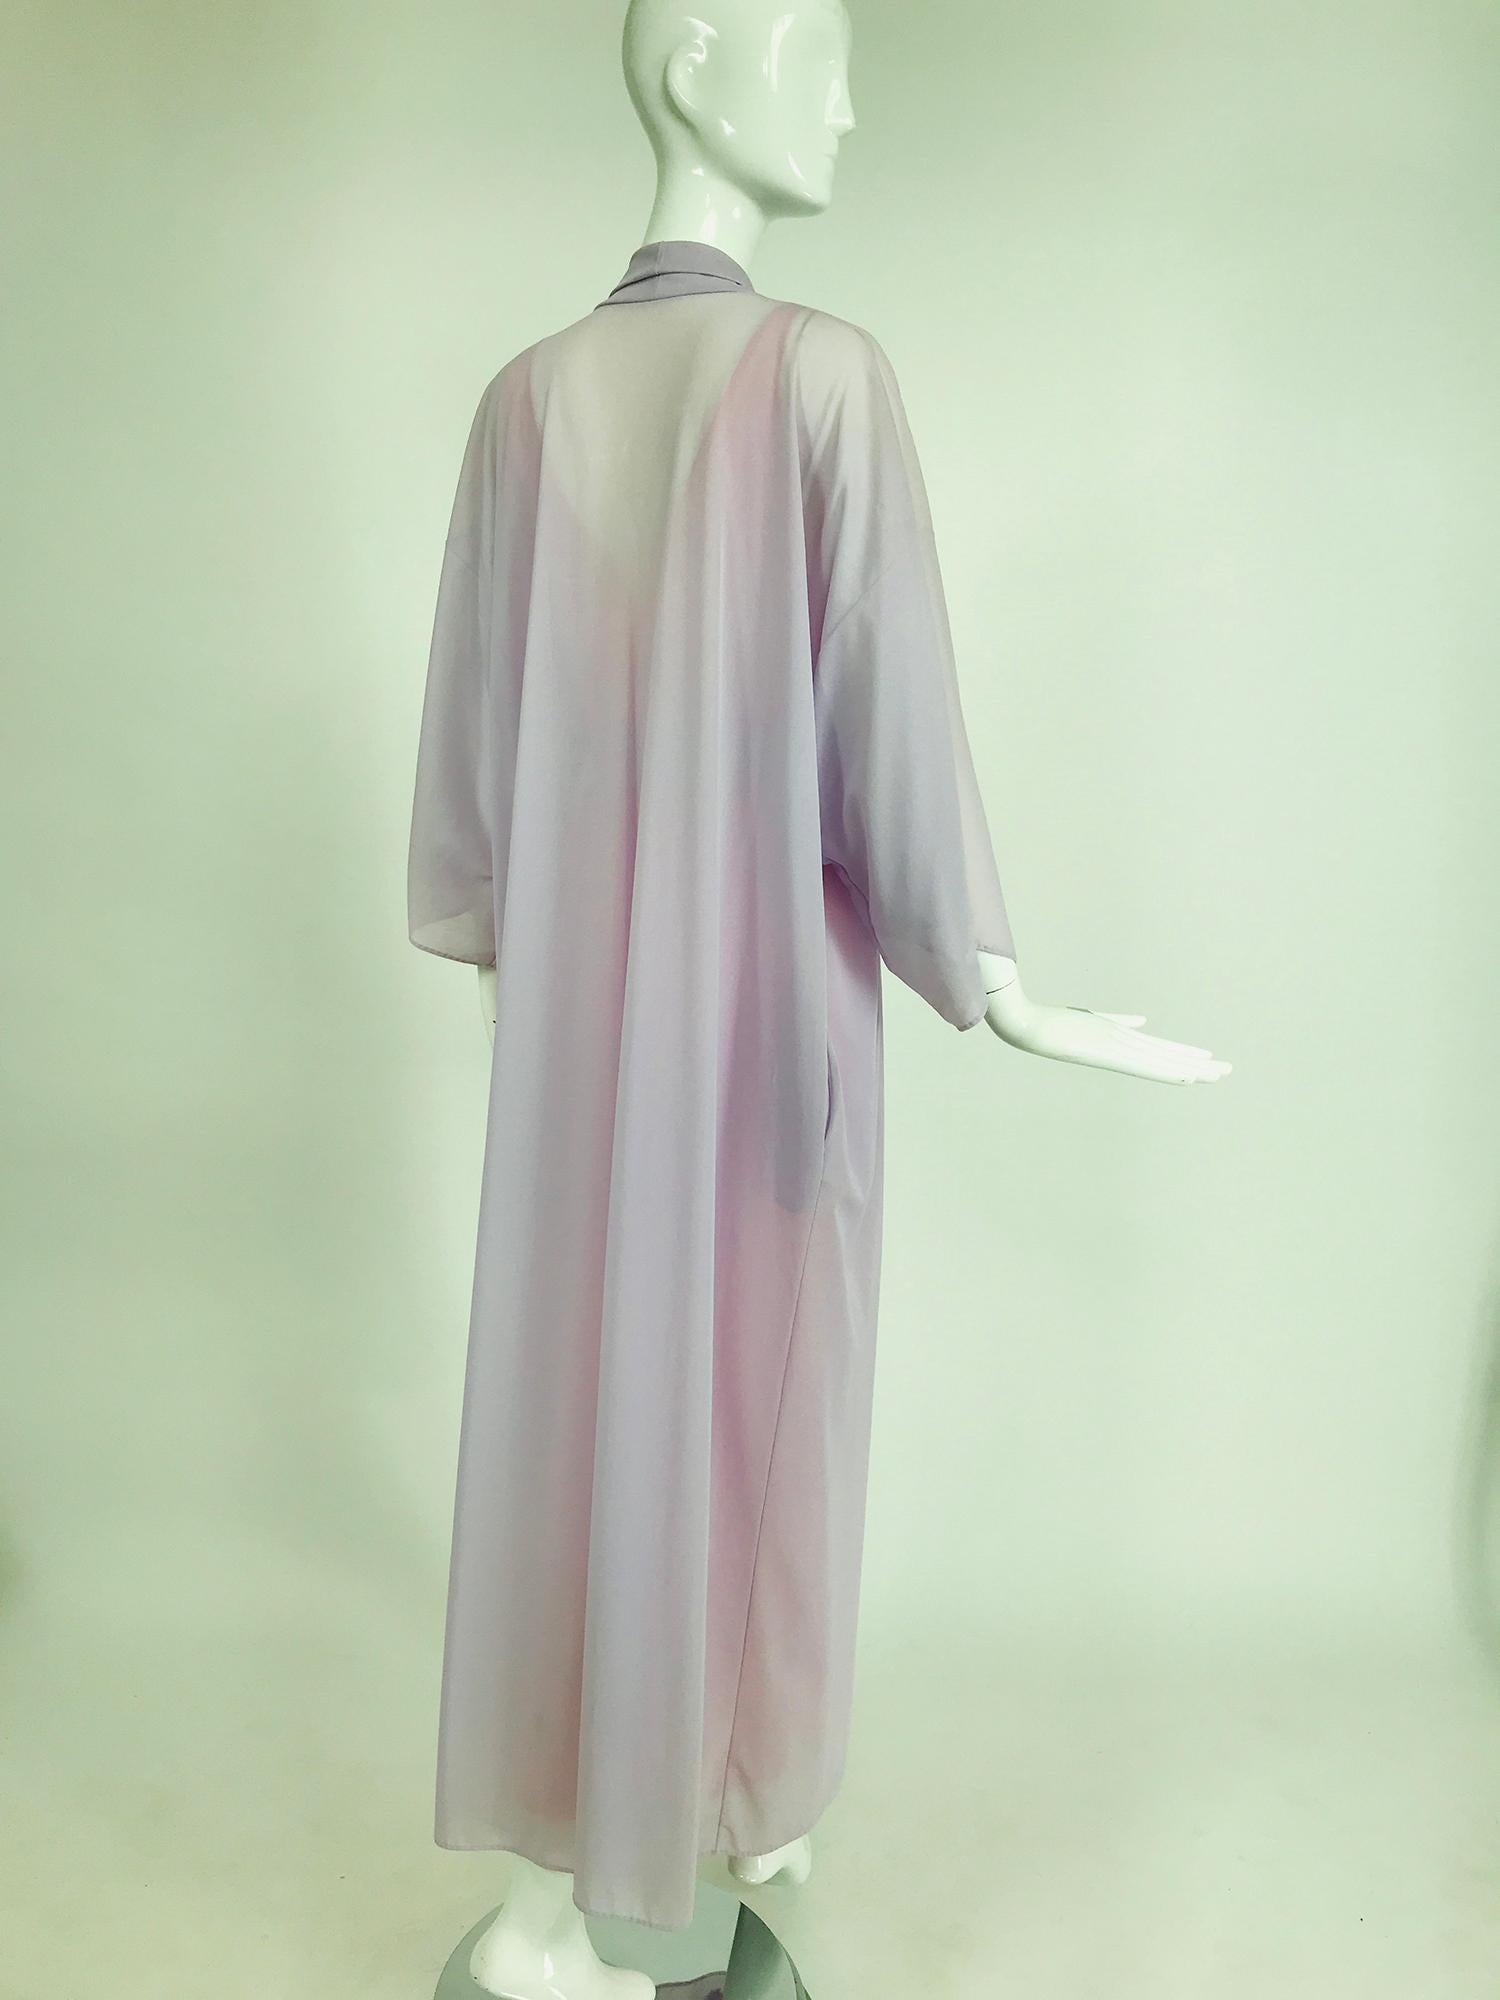 Gray Emilio Pucci for Formfit Rogers 2pc. Sheer Peignoir Robe & Gown 1970s